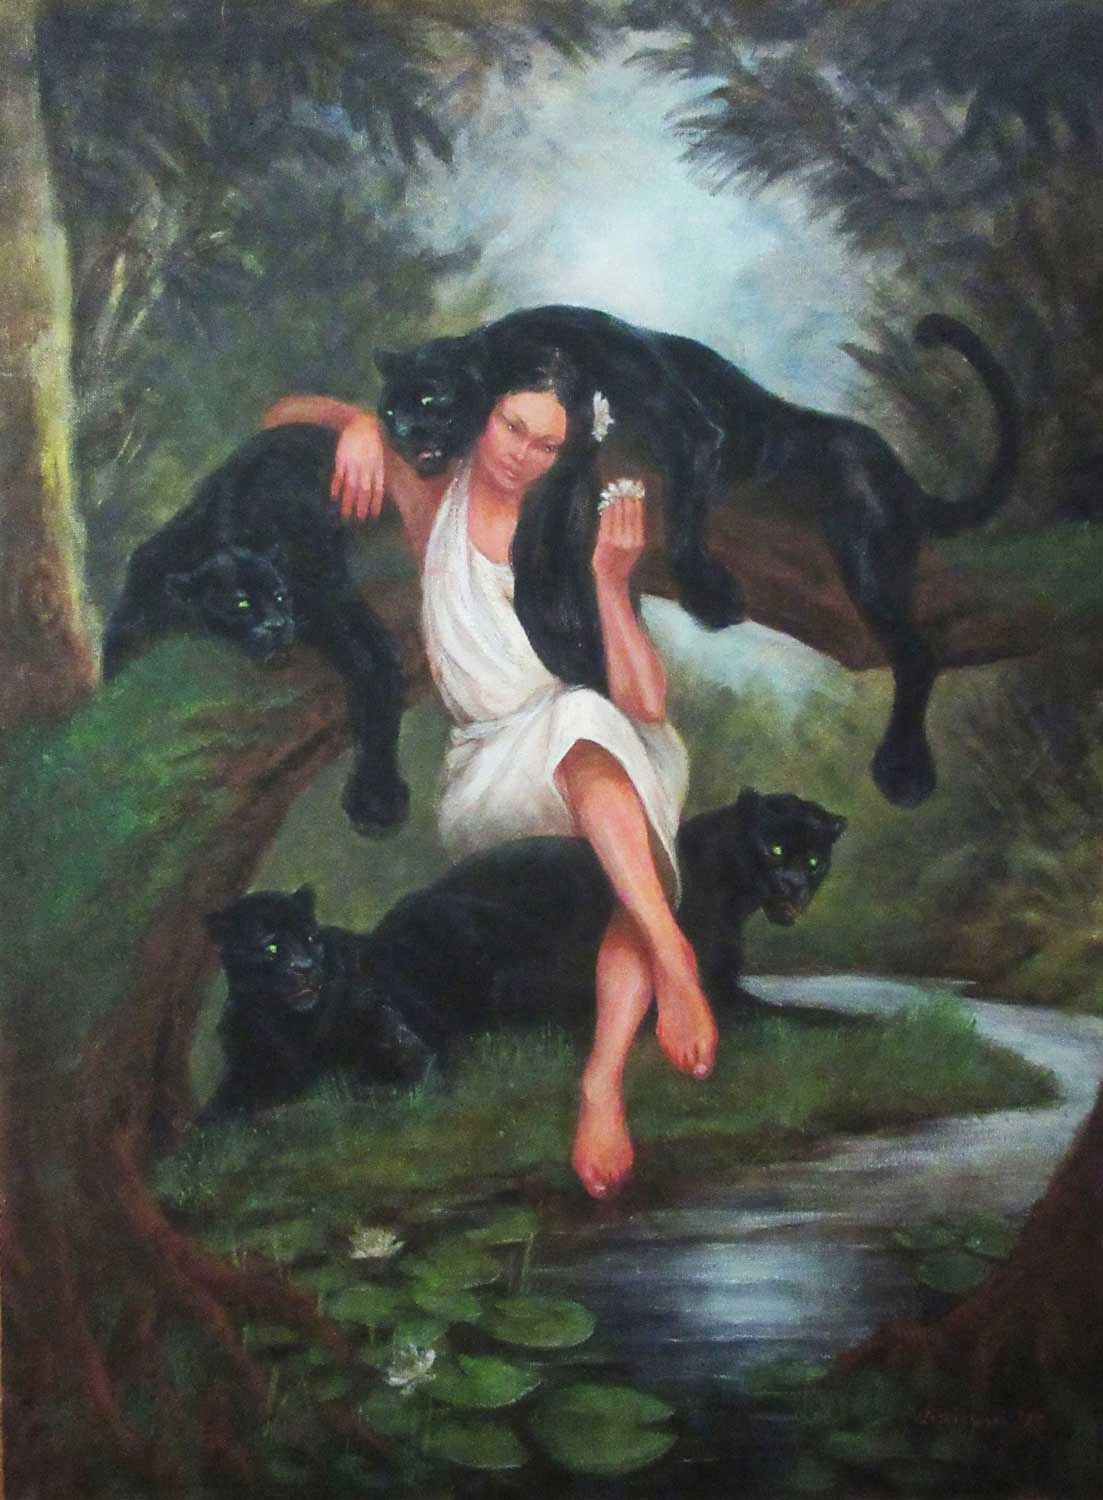 Woman in jungle with four panthers.
Acrylic painting by Stan Wisniewski.